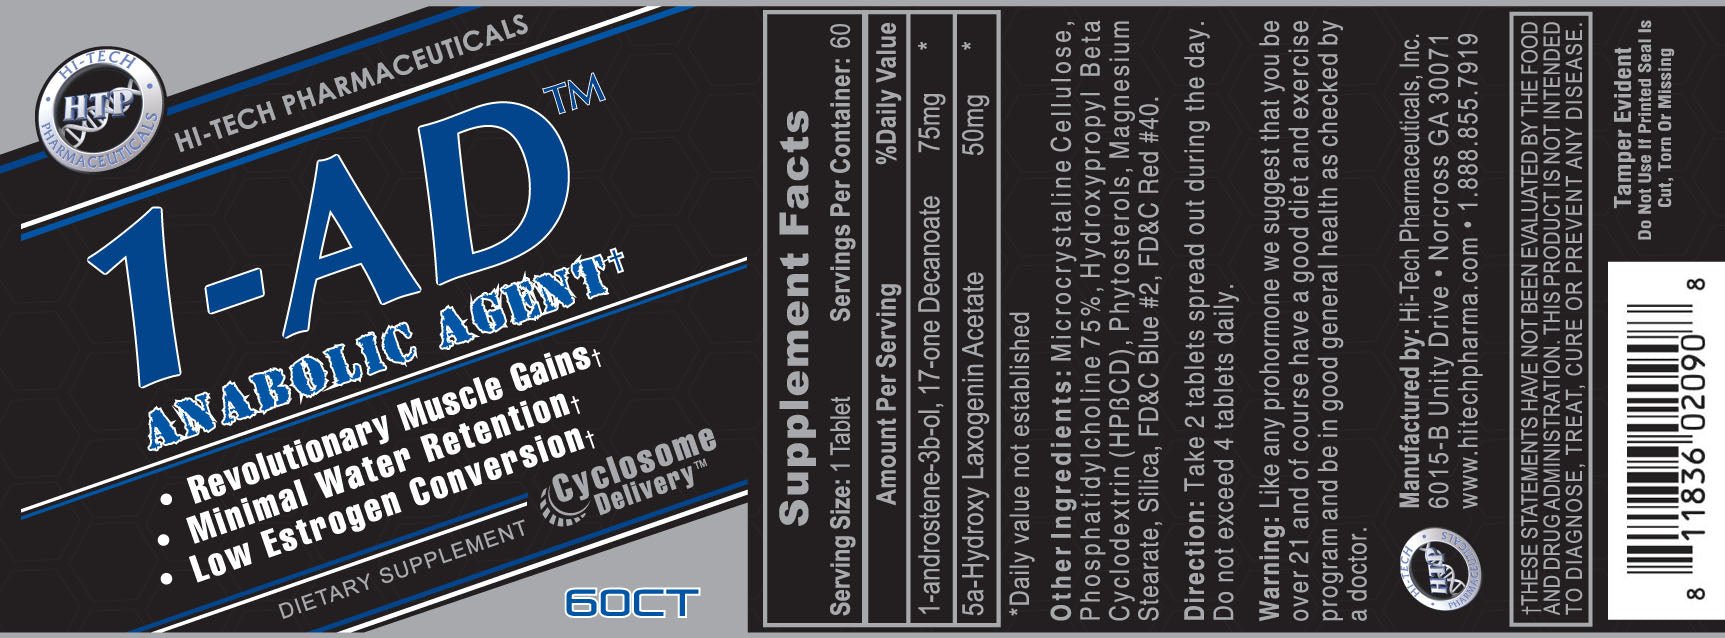 Label for 1 AD prohormone from hi tech